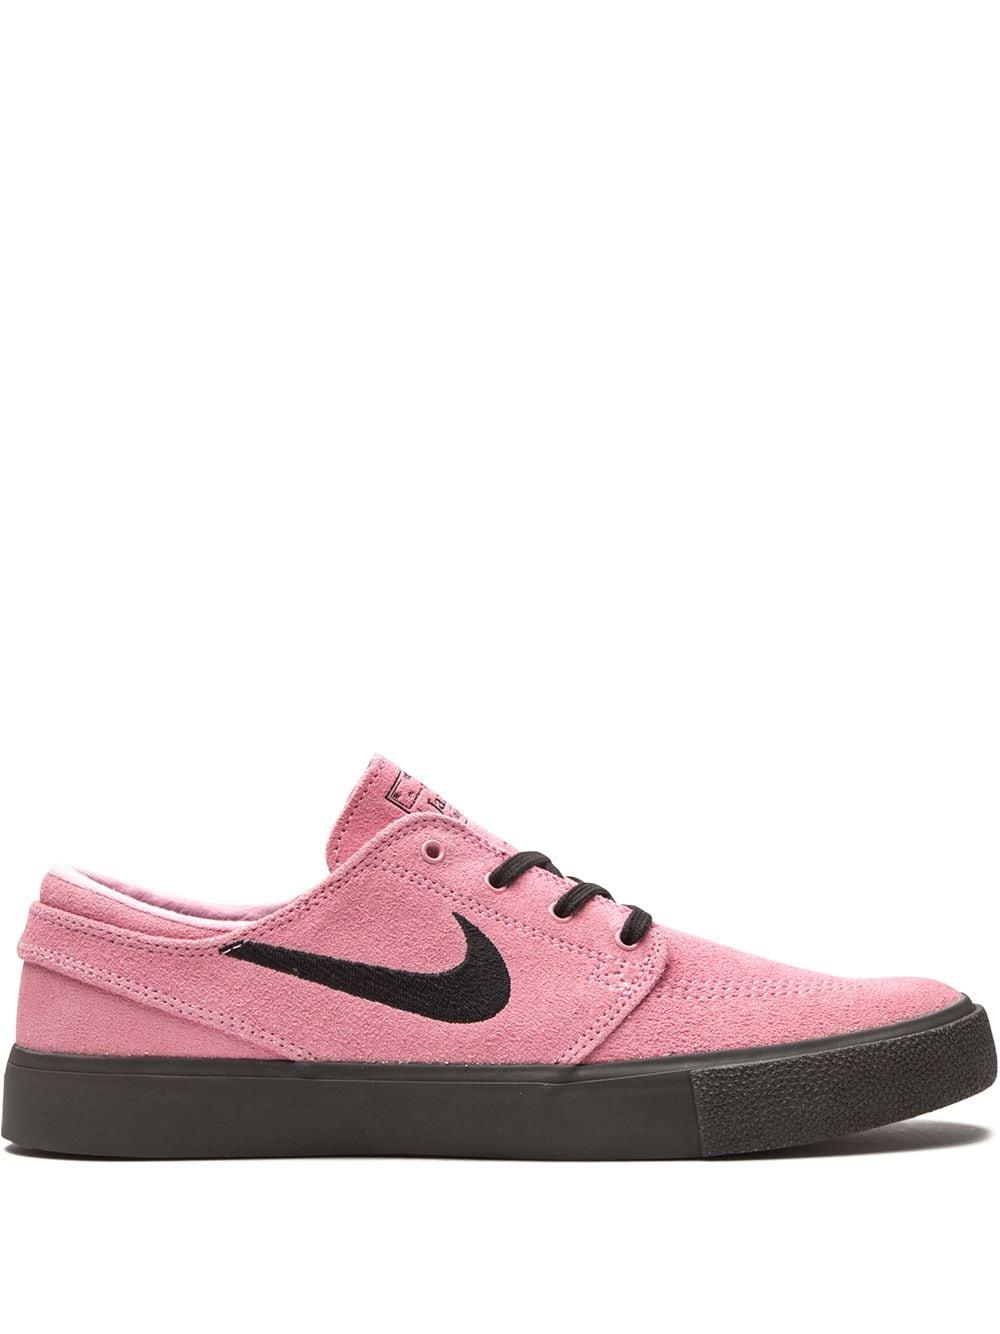 Nike Sb Zoom Janoski Rm Sneakers in Pink for Men | Lyst